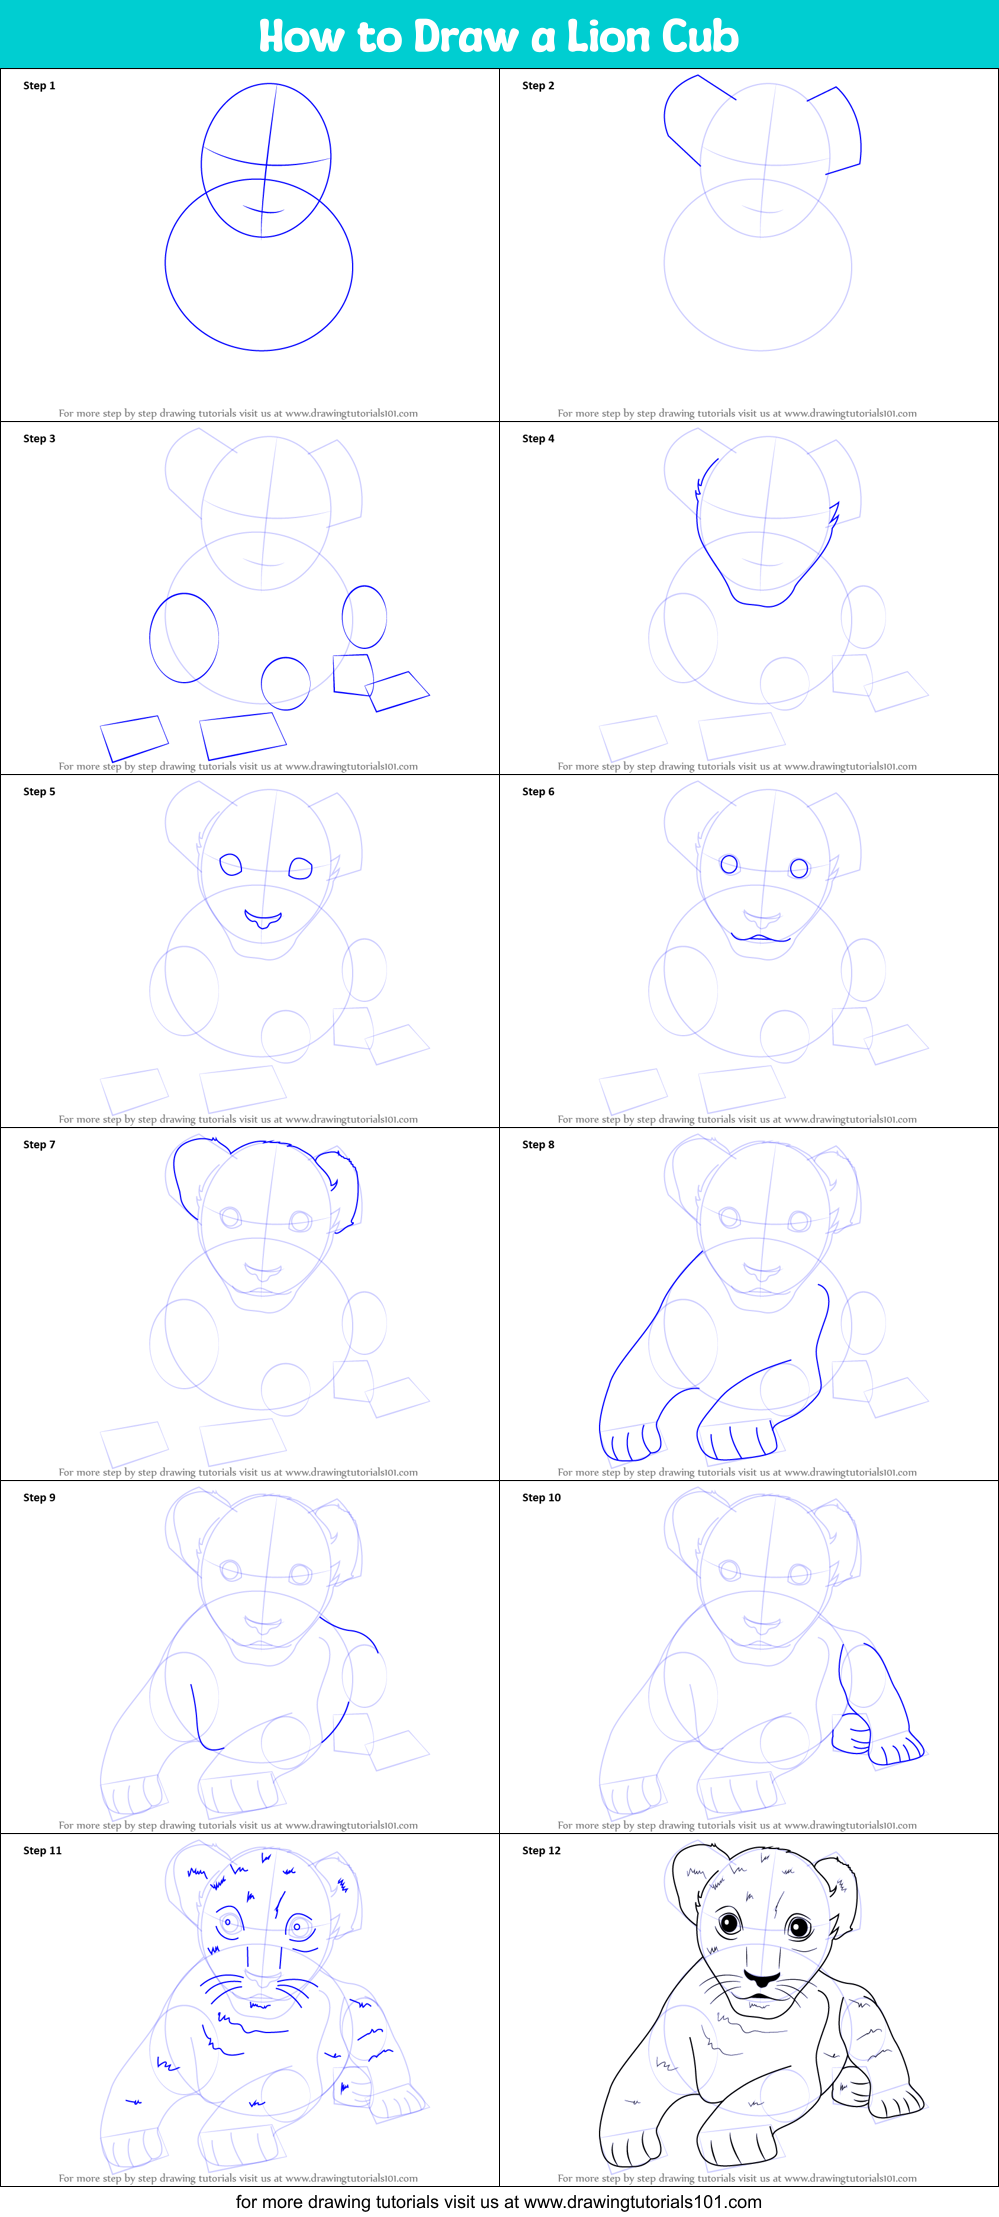 How to Draw a Lion Cub printable step by step drawing sheet